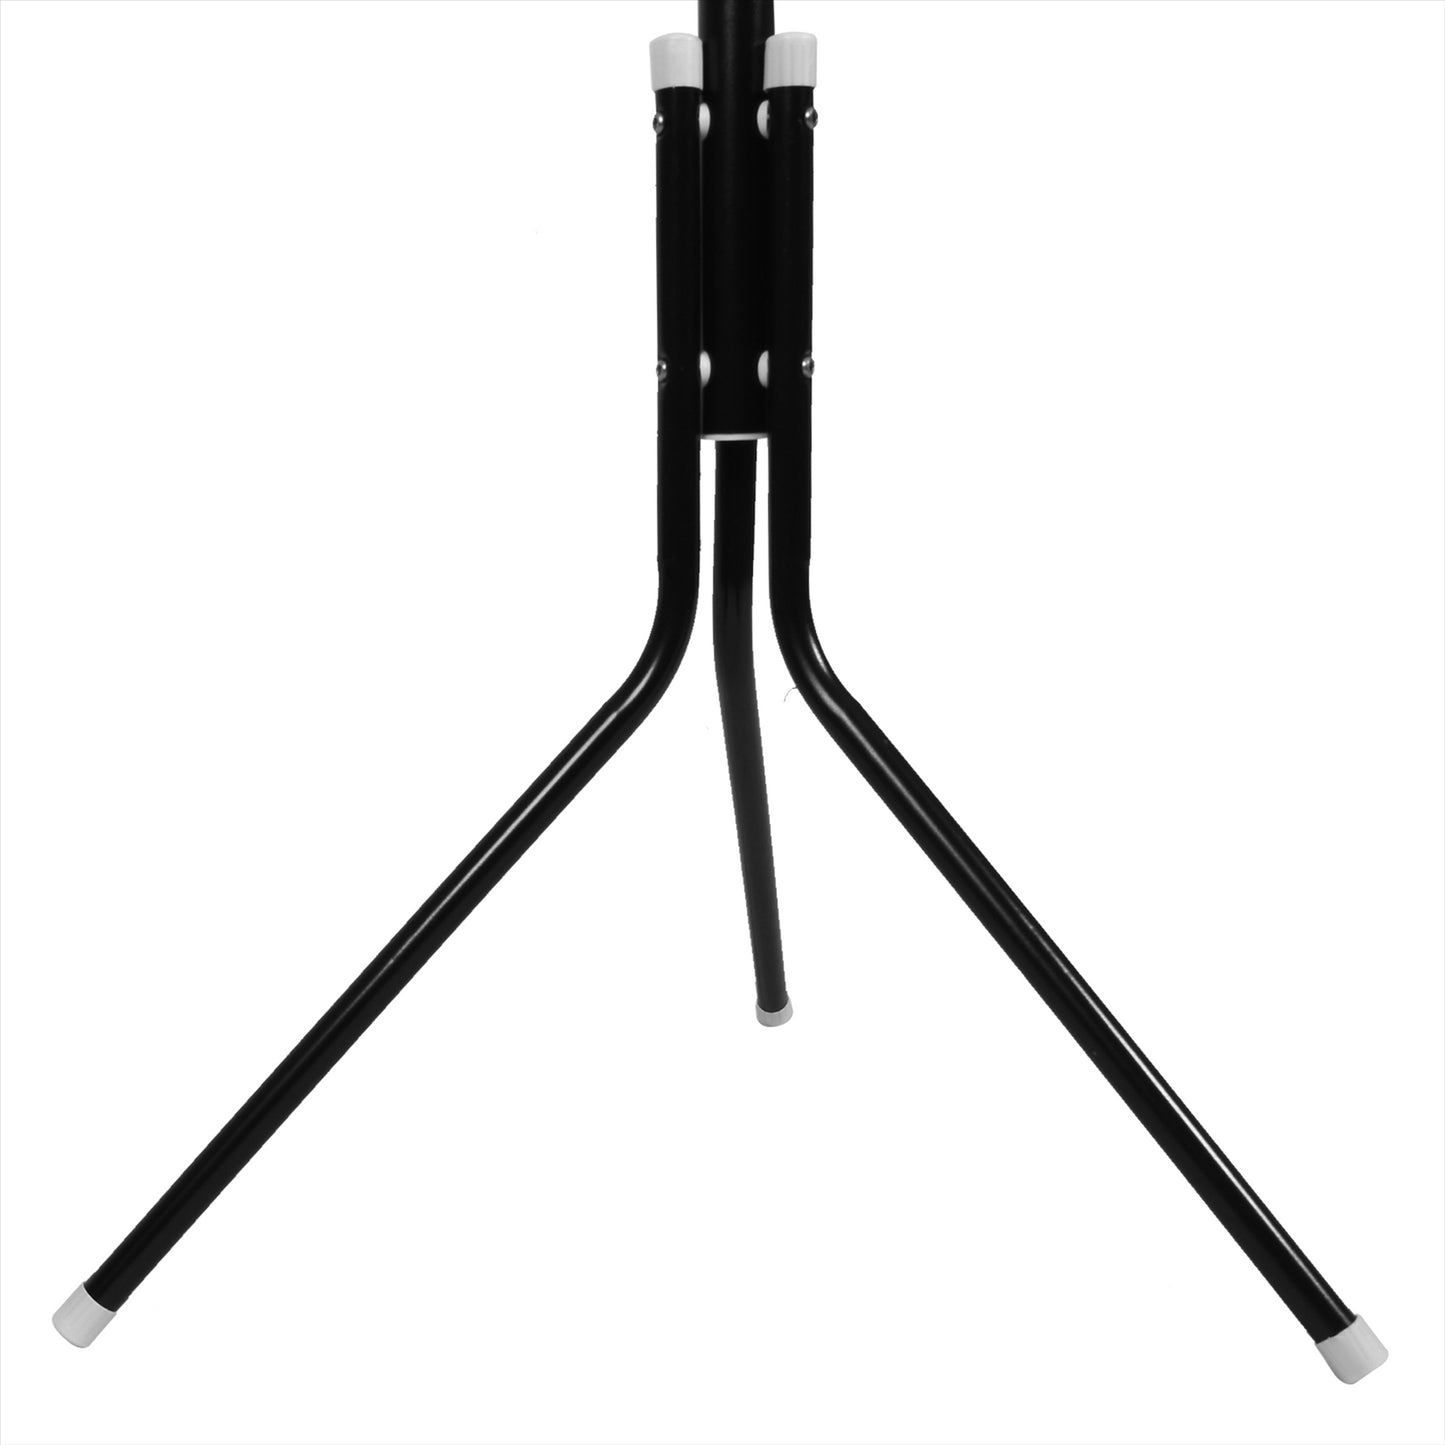 12-Hook Coat Stand And Clothes Hanger Rack